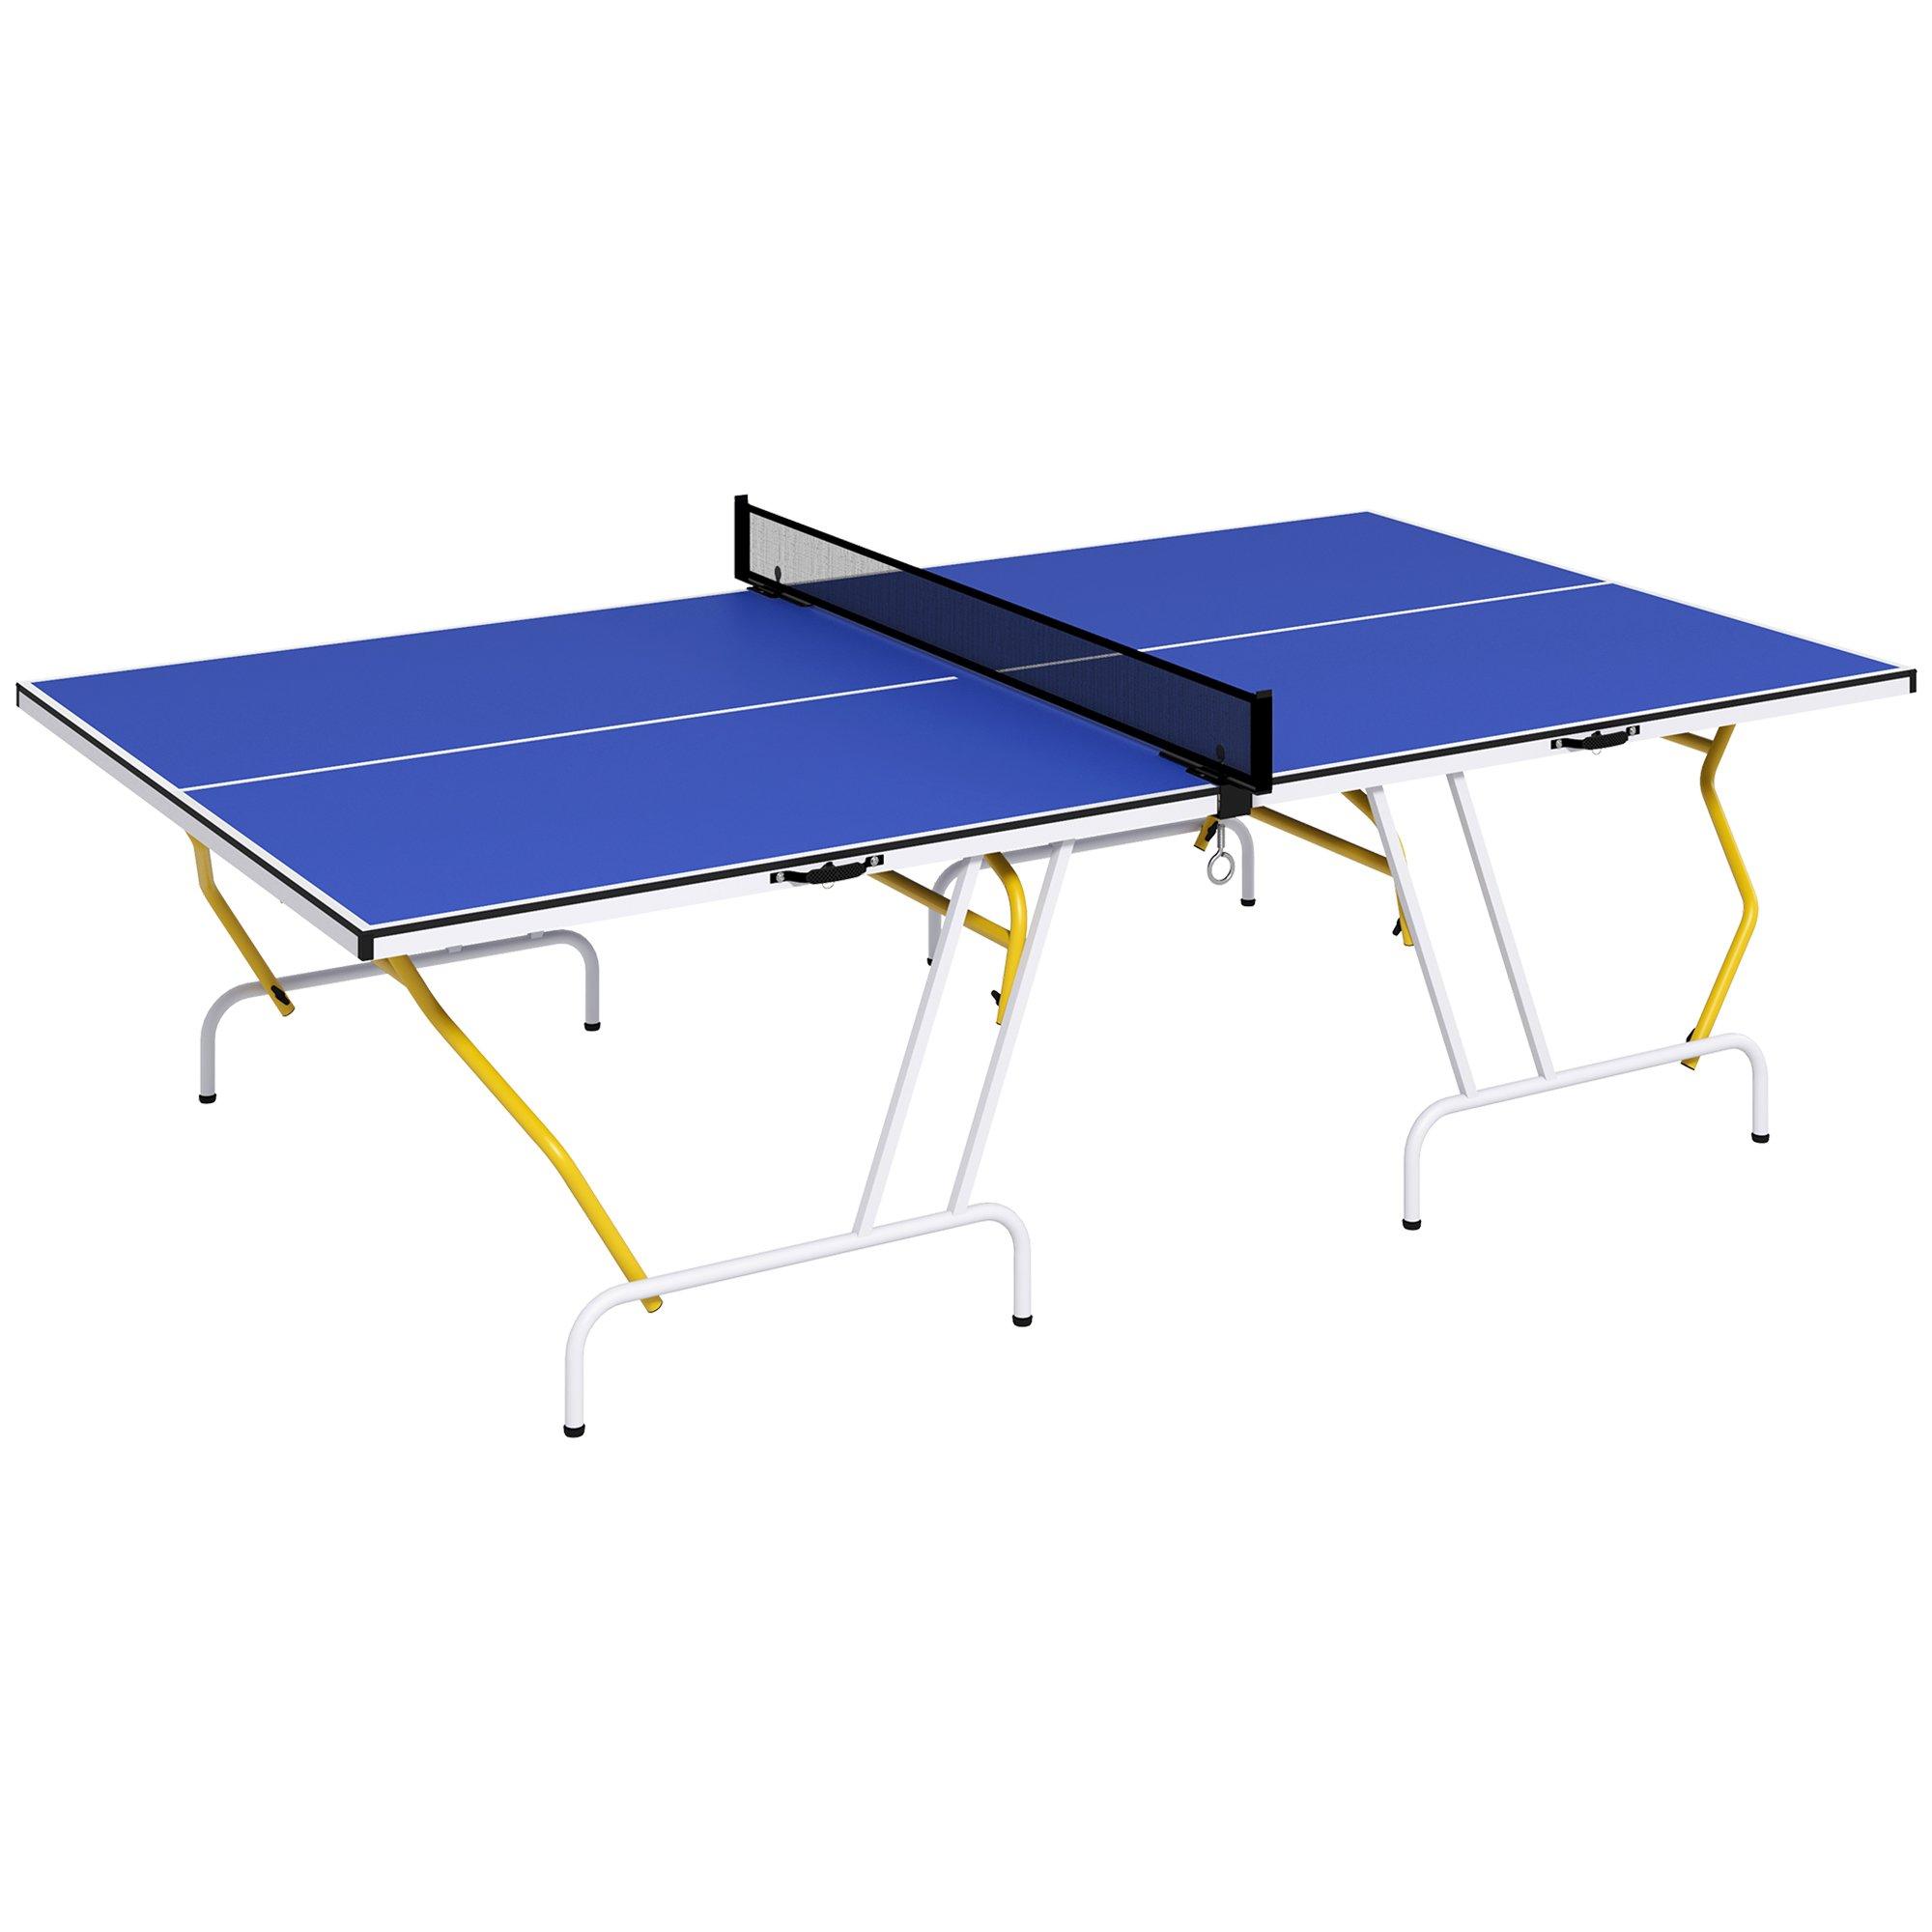 9FT Foldable Table Tennis Table with Cover, Net, Paddles, Balls